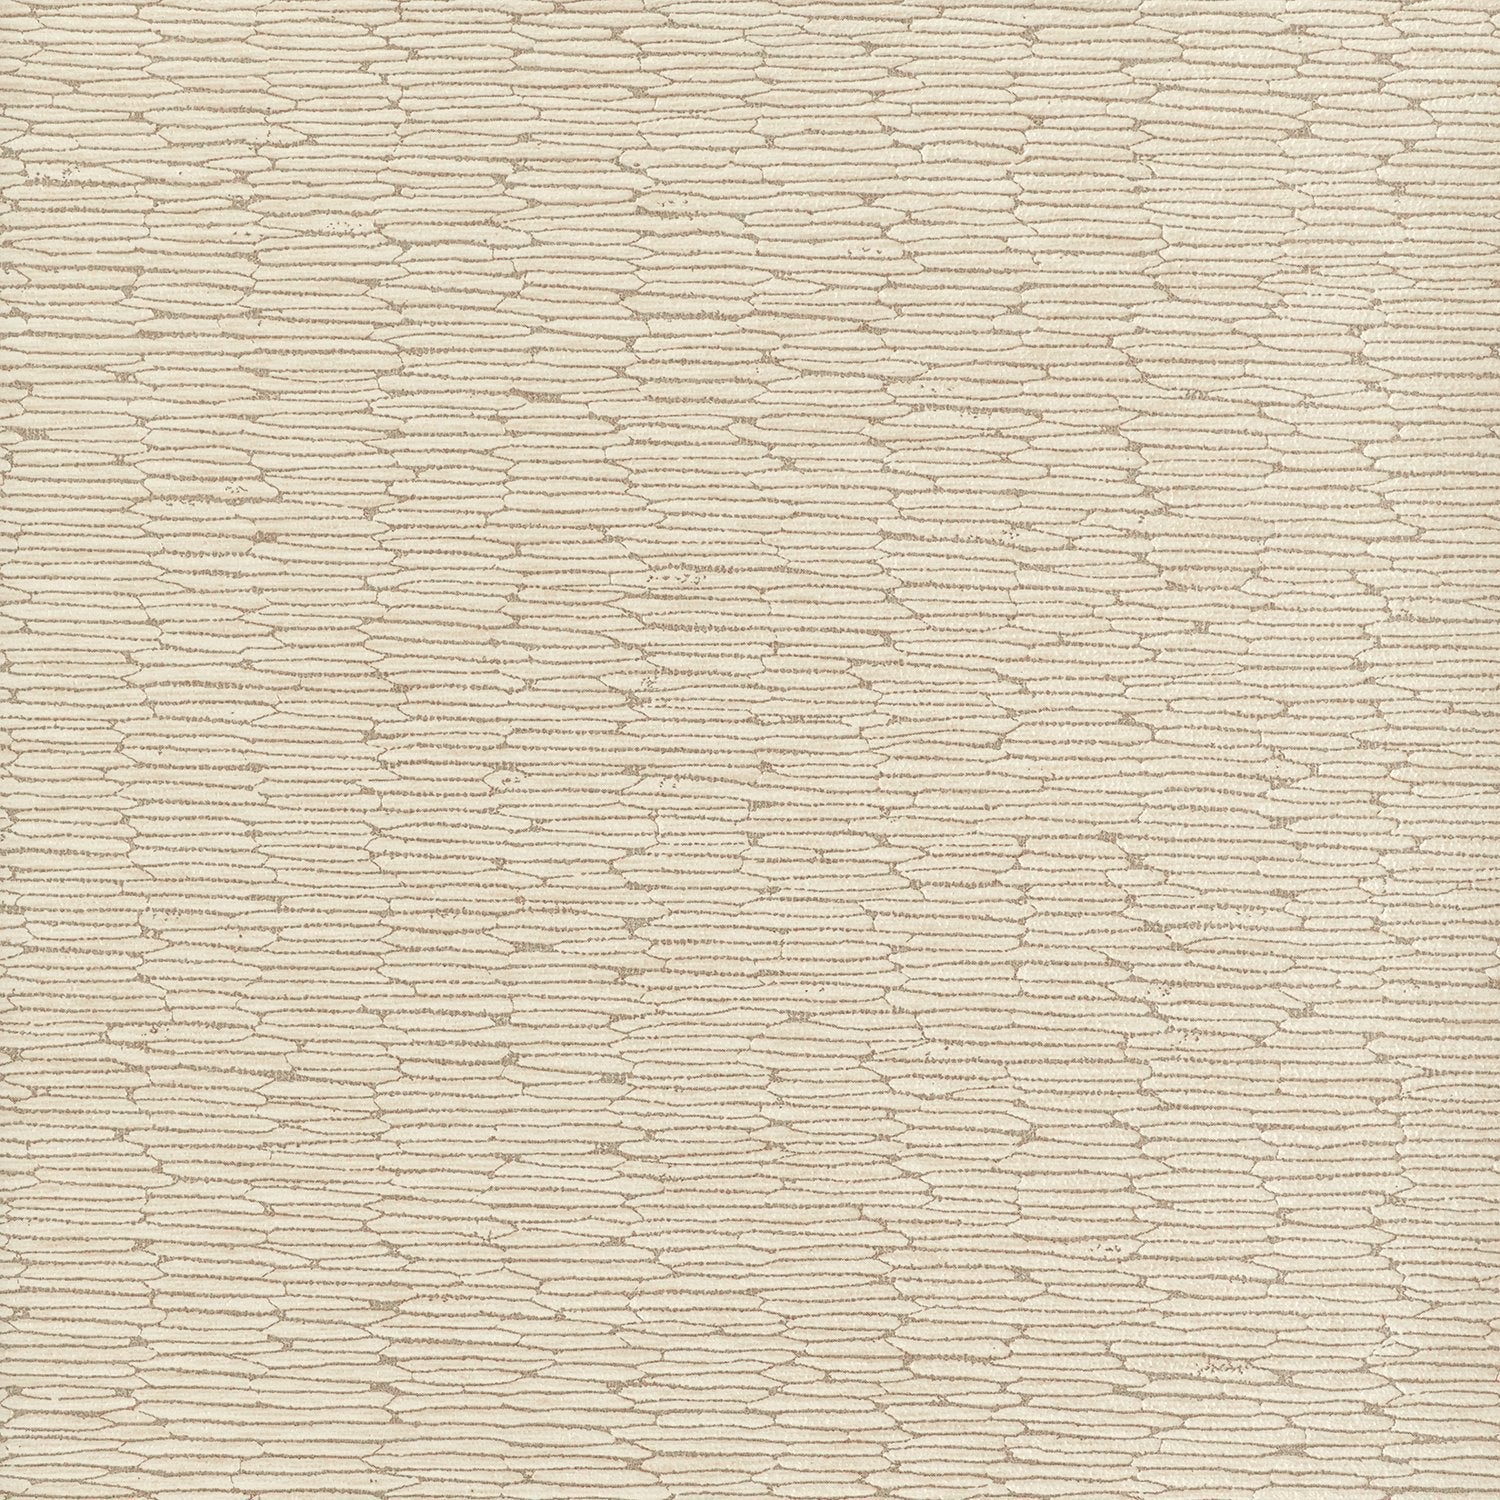 Chipper - Y46858 - Wallcovering - Vycon - Kube Contract